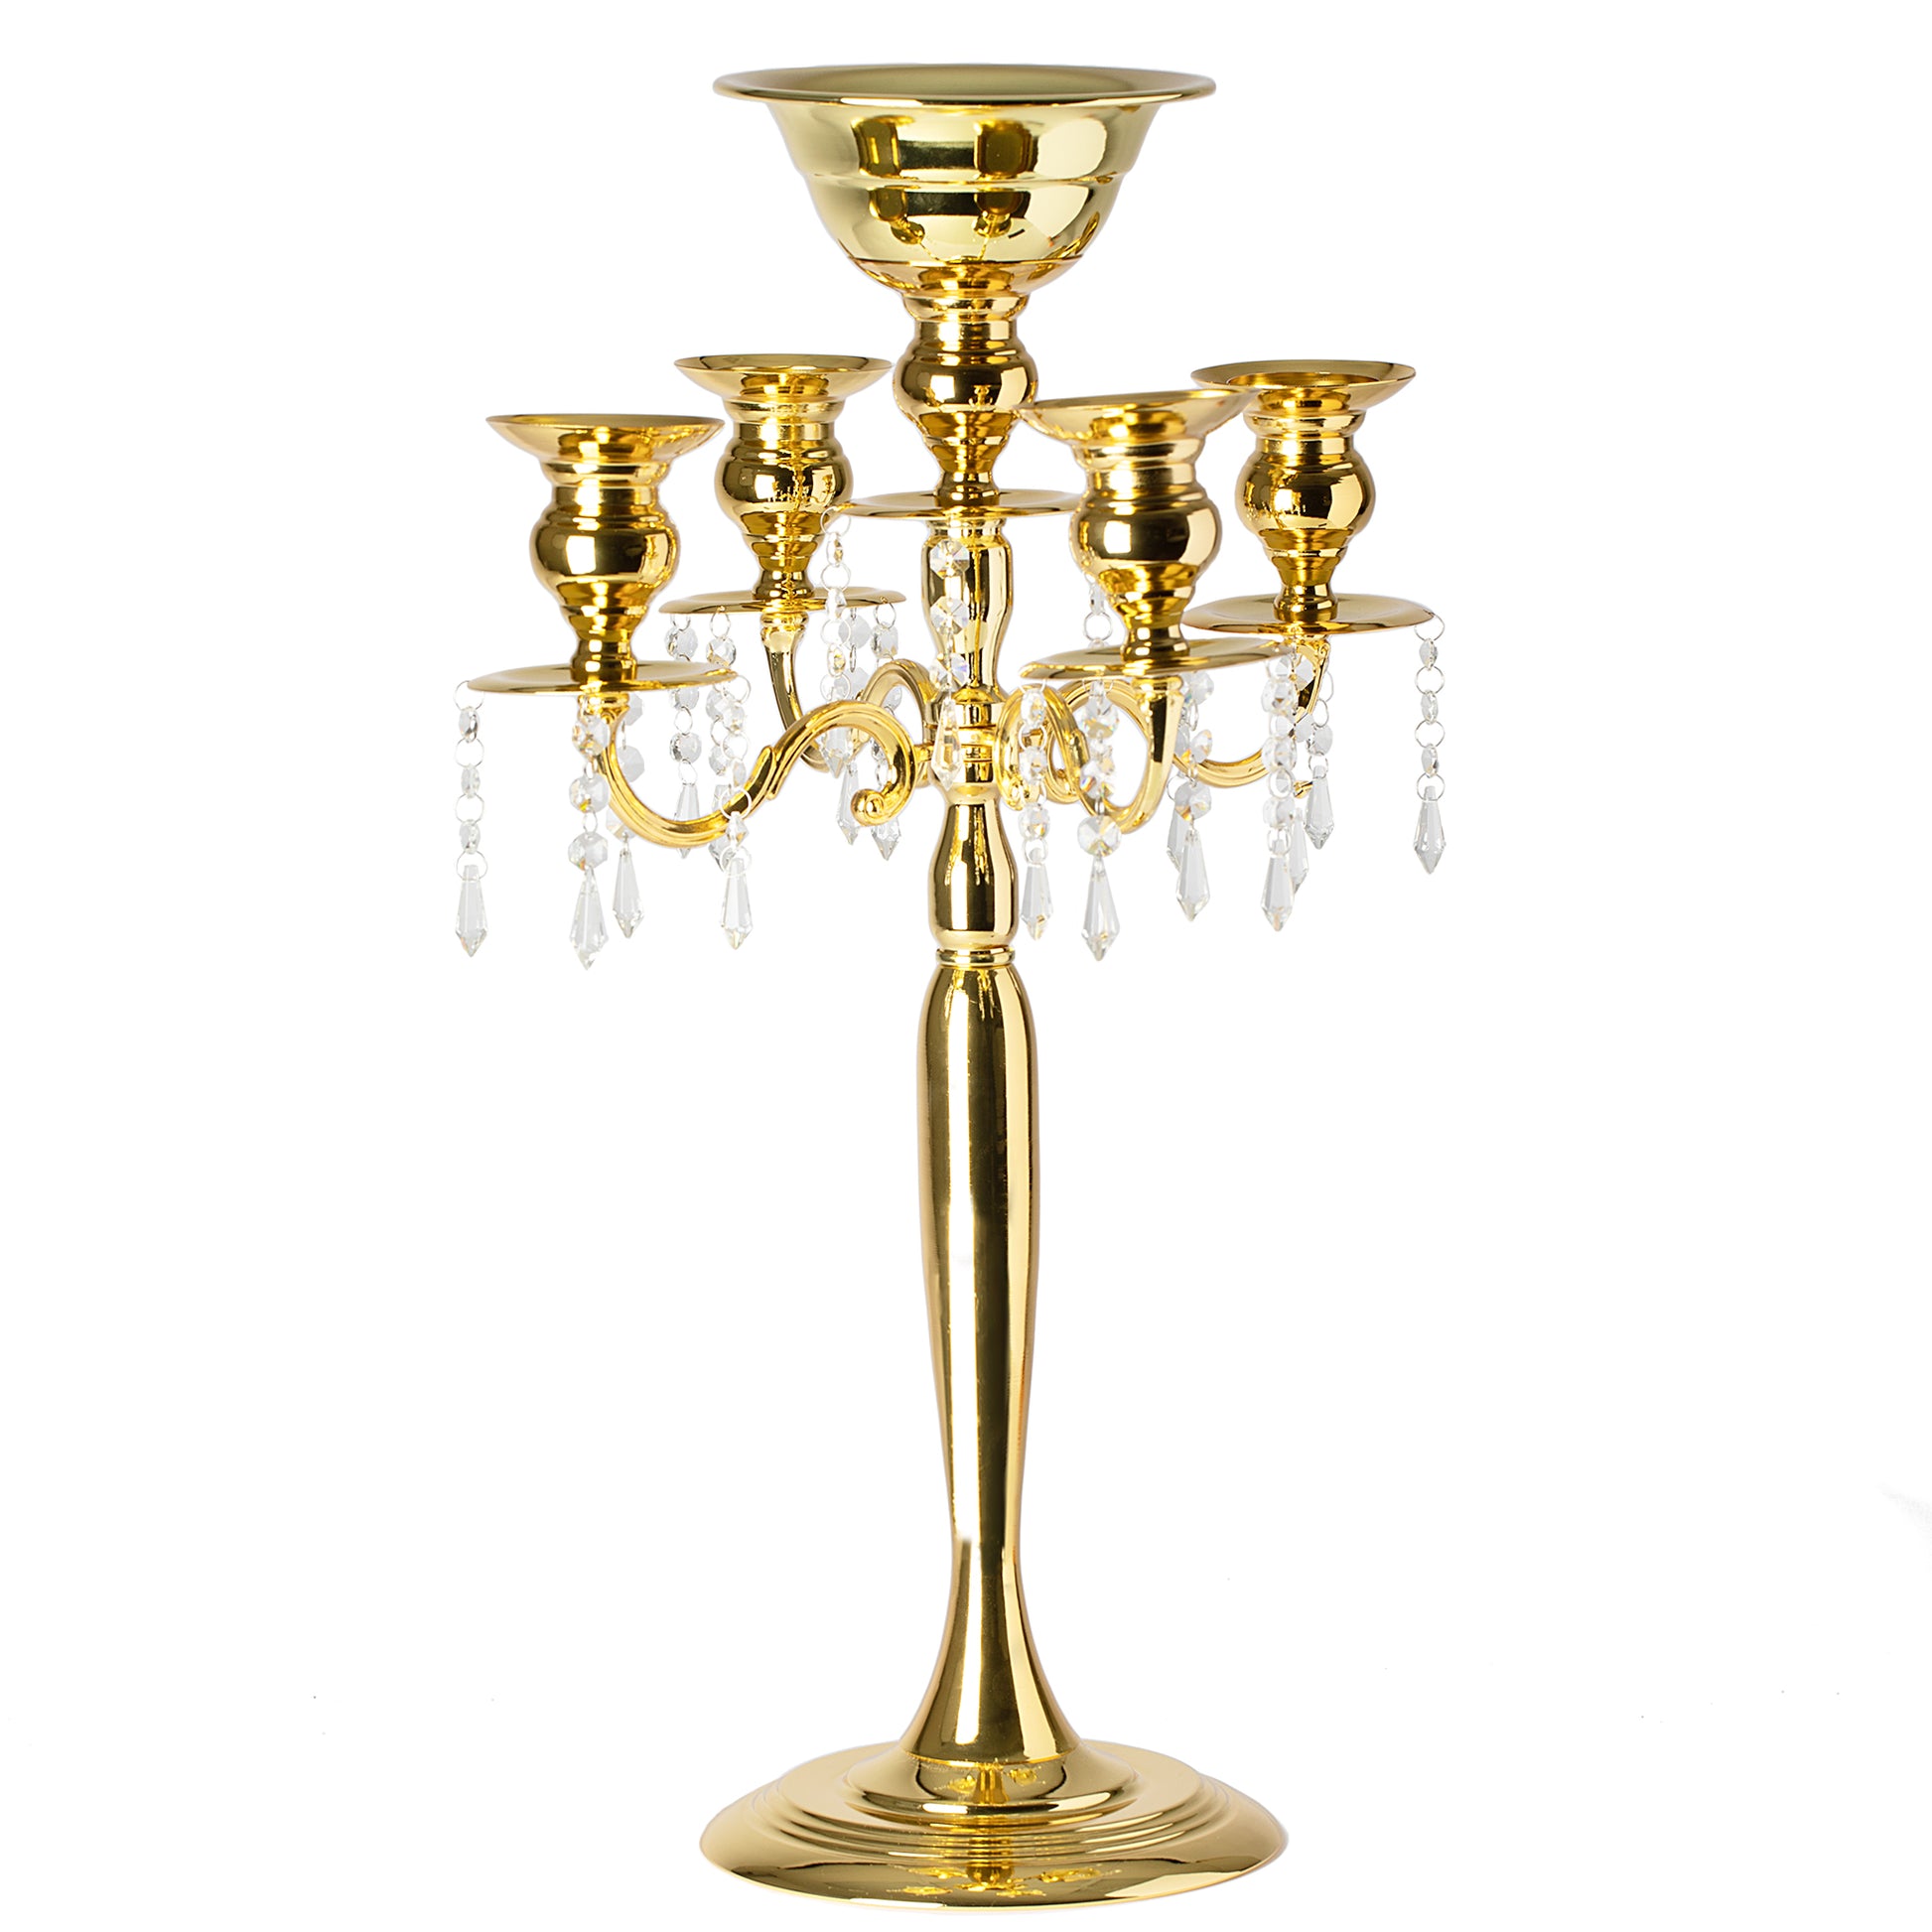 Candelabra Centerpiece with Hanging Crystals - Gold - CV Linens